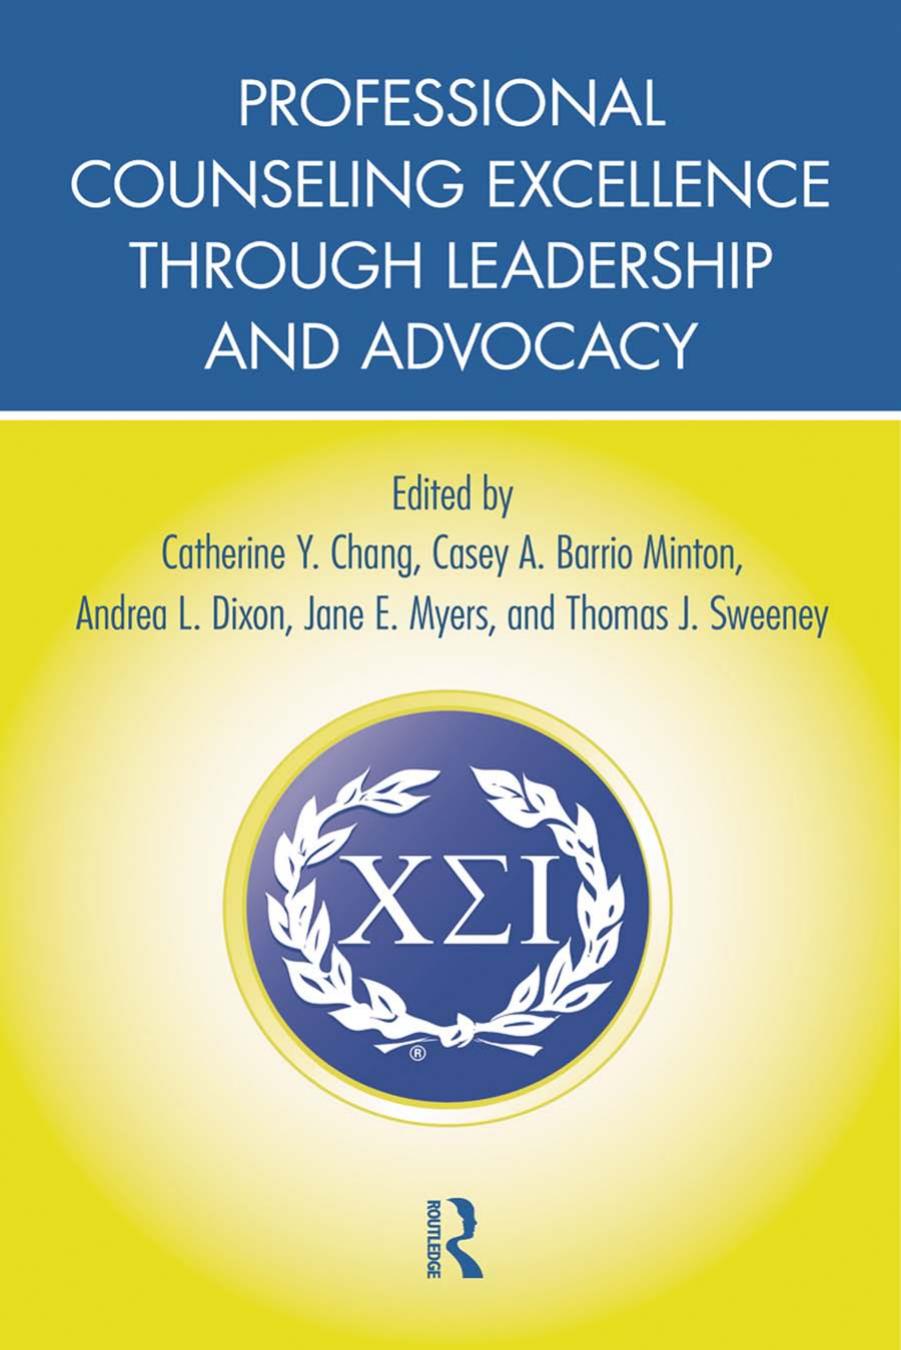 (eBook PDF)PProfessional Counseling Excellence through Leadership and Advocacy 1st Edition by Catherine Chang; Andrea Dixon;